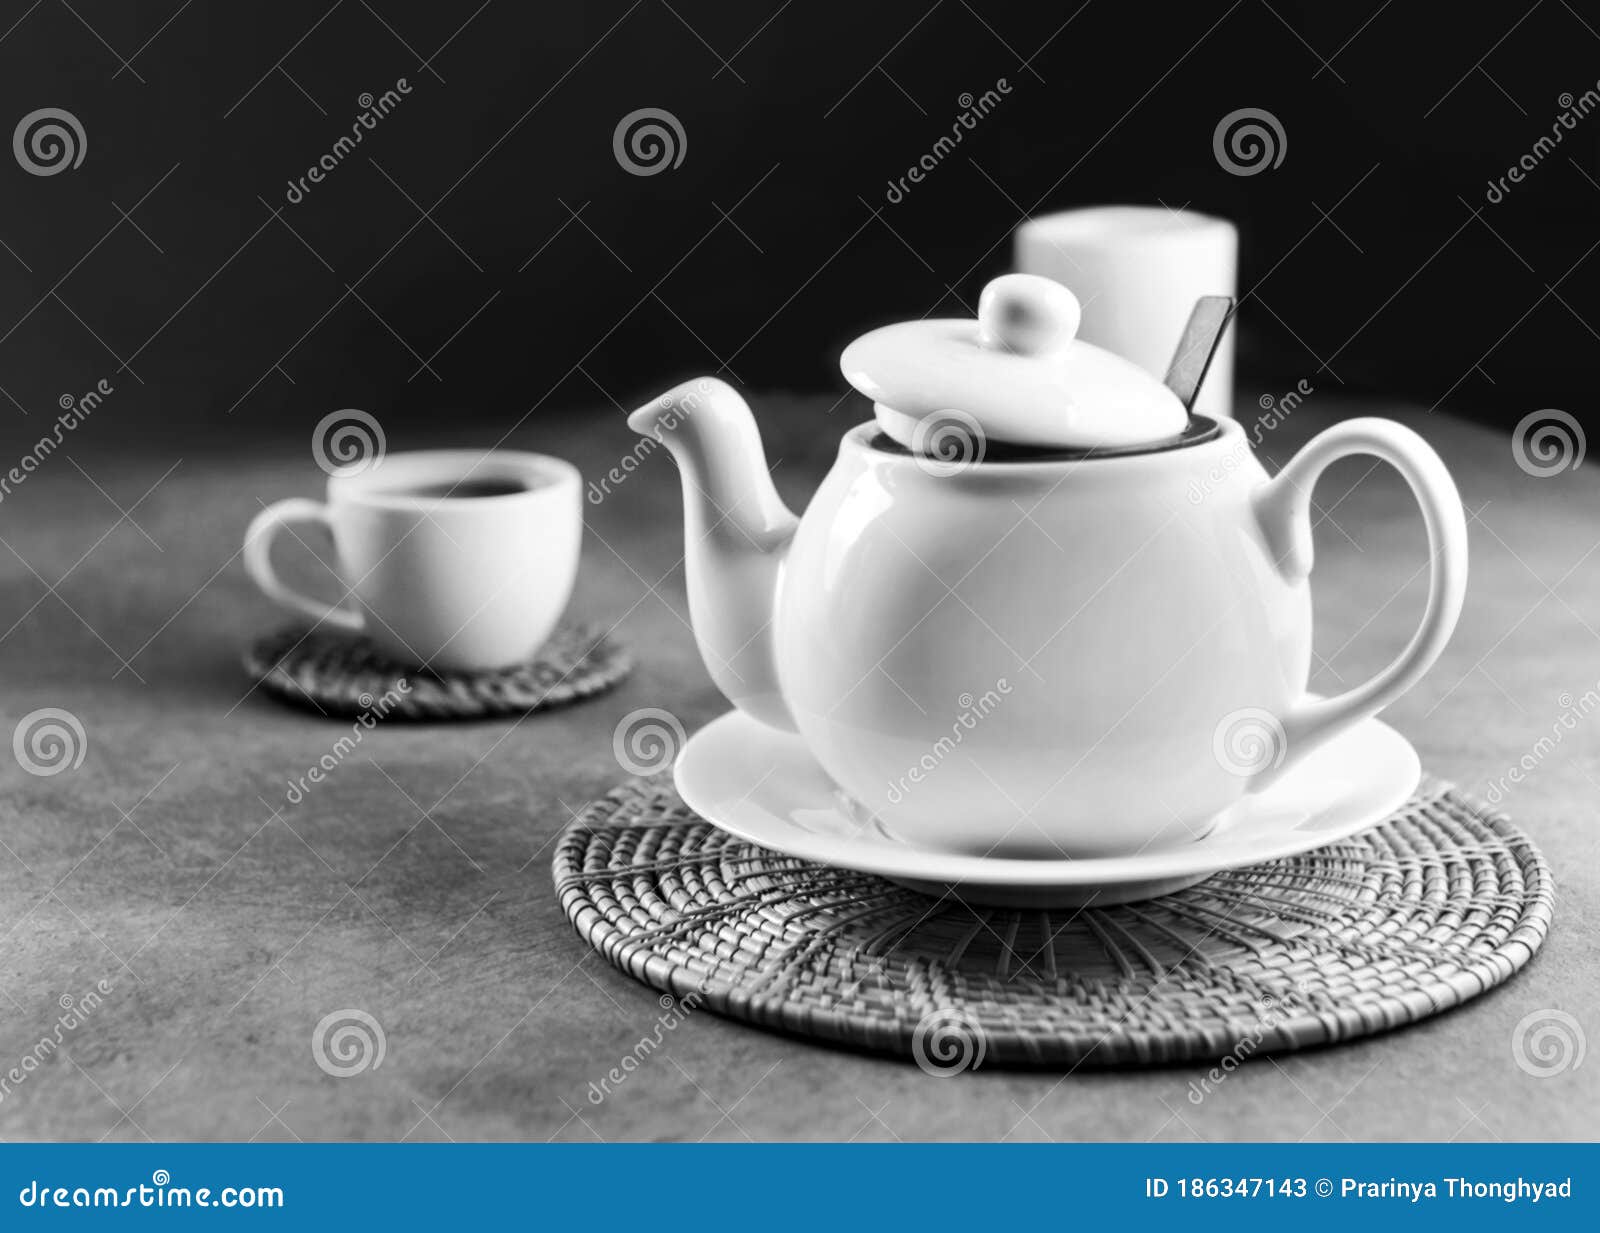 https://thumbs.dreamstime.com/z/white-porcelain-tea-cup-teapot-afternoon-table-setting-black-186347143.jpg